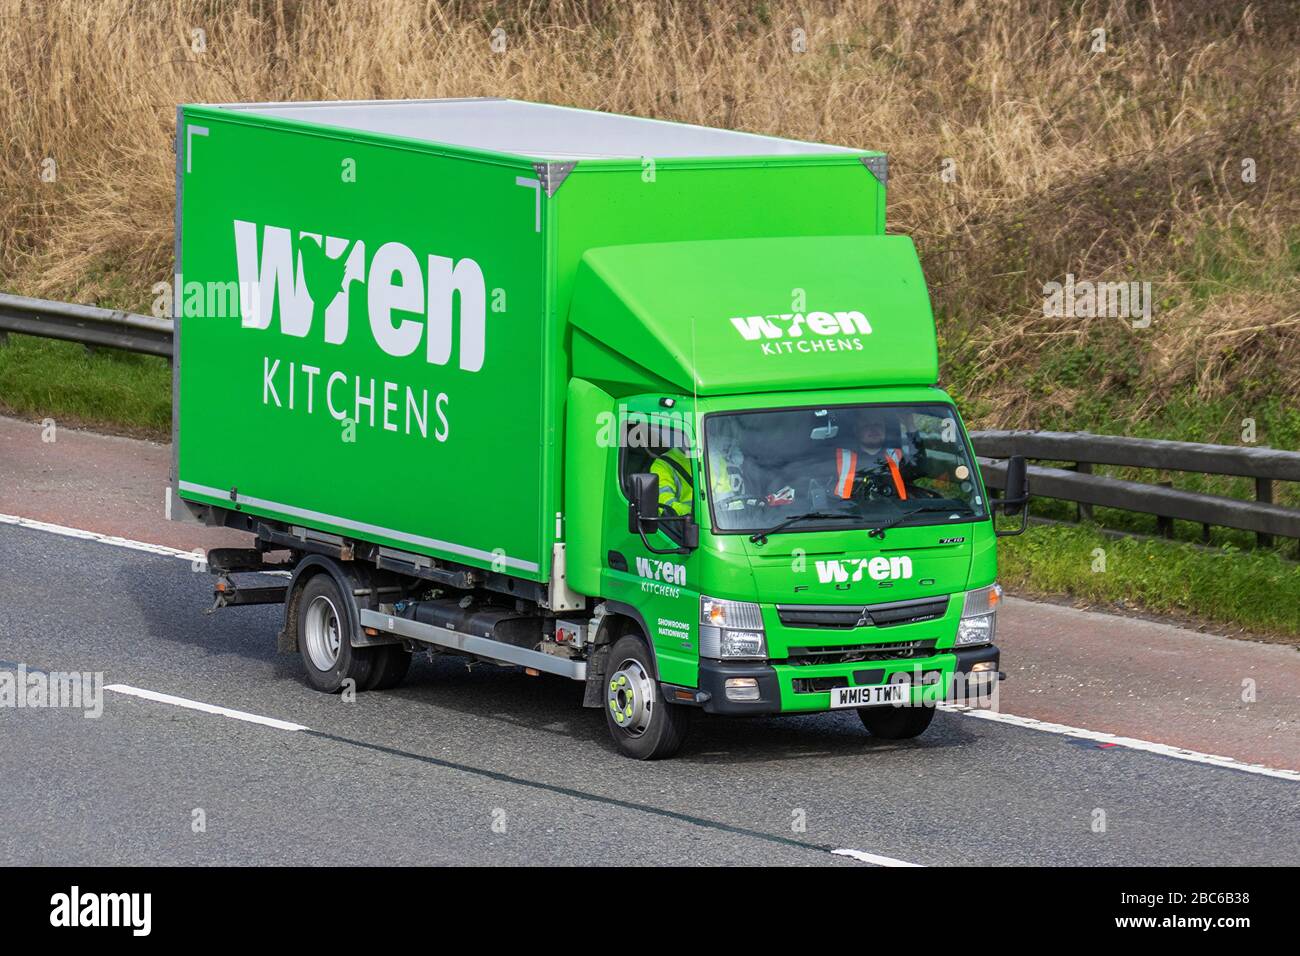 Wren Kitchens Haulage delivery trucks, green Mitsubishi Fuso Canter 7c18 38 Auto lorry, transportation, truck, cargo carrier, vehicle, European commercial transport, industry, M6 at Manchester, UK Stock Photo